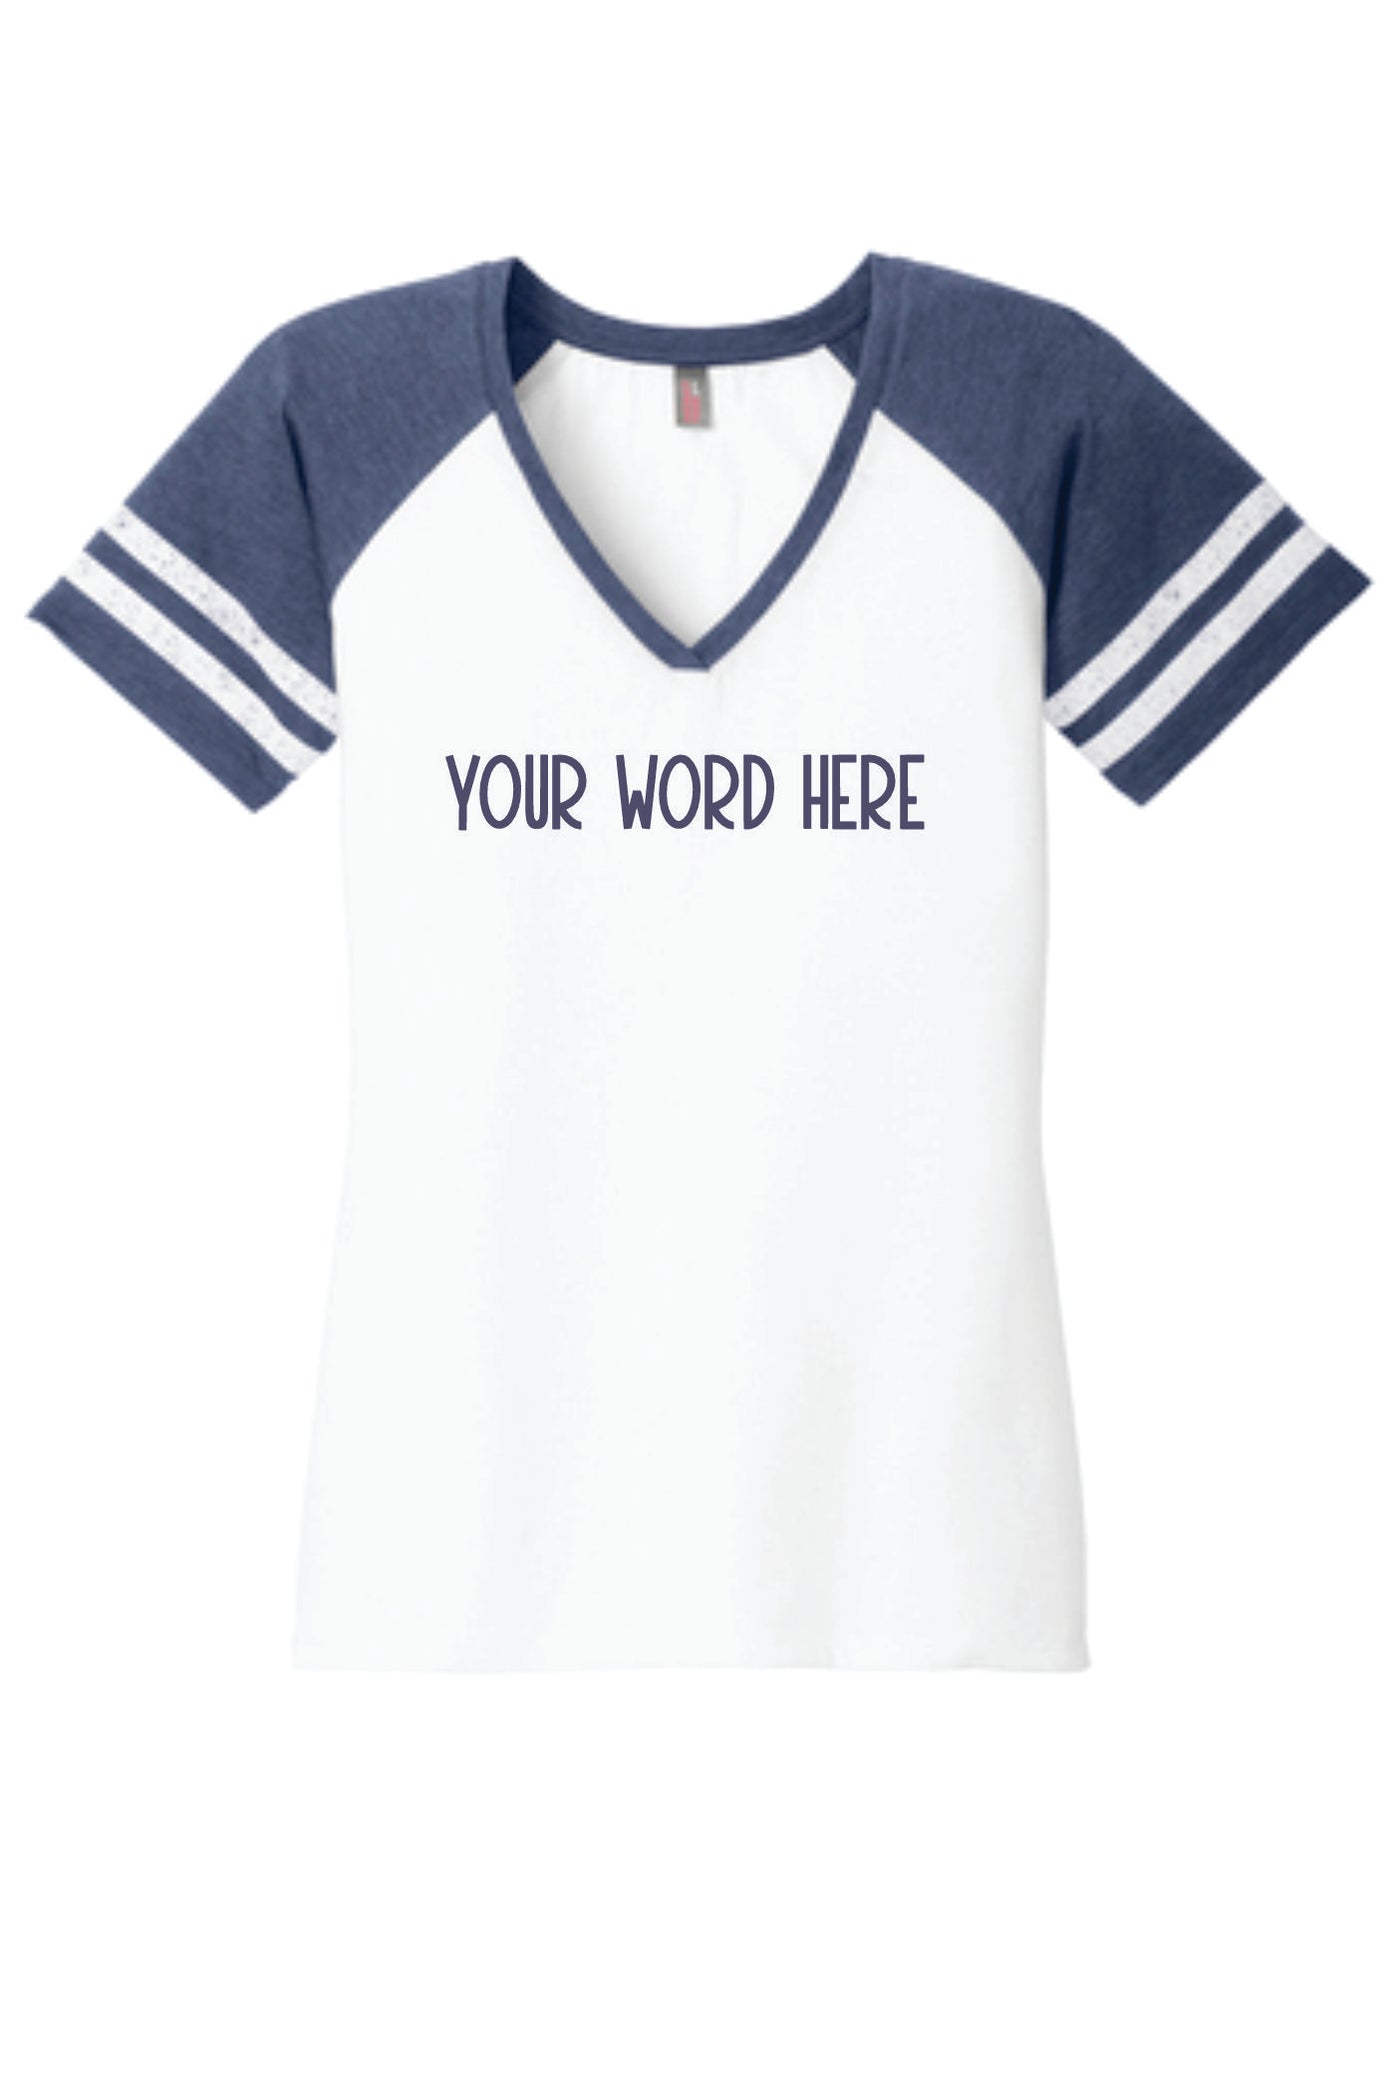 Word of the Year short sleeve v neck shirt